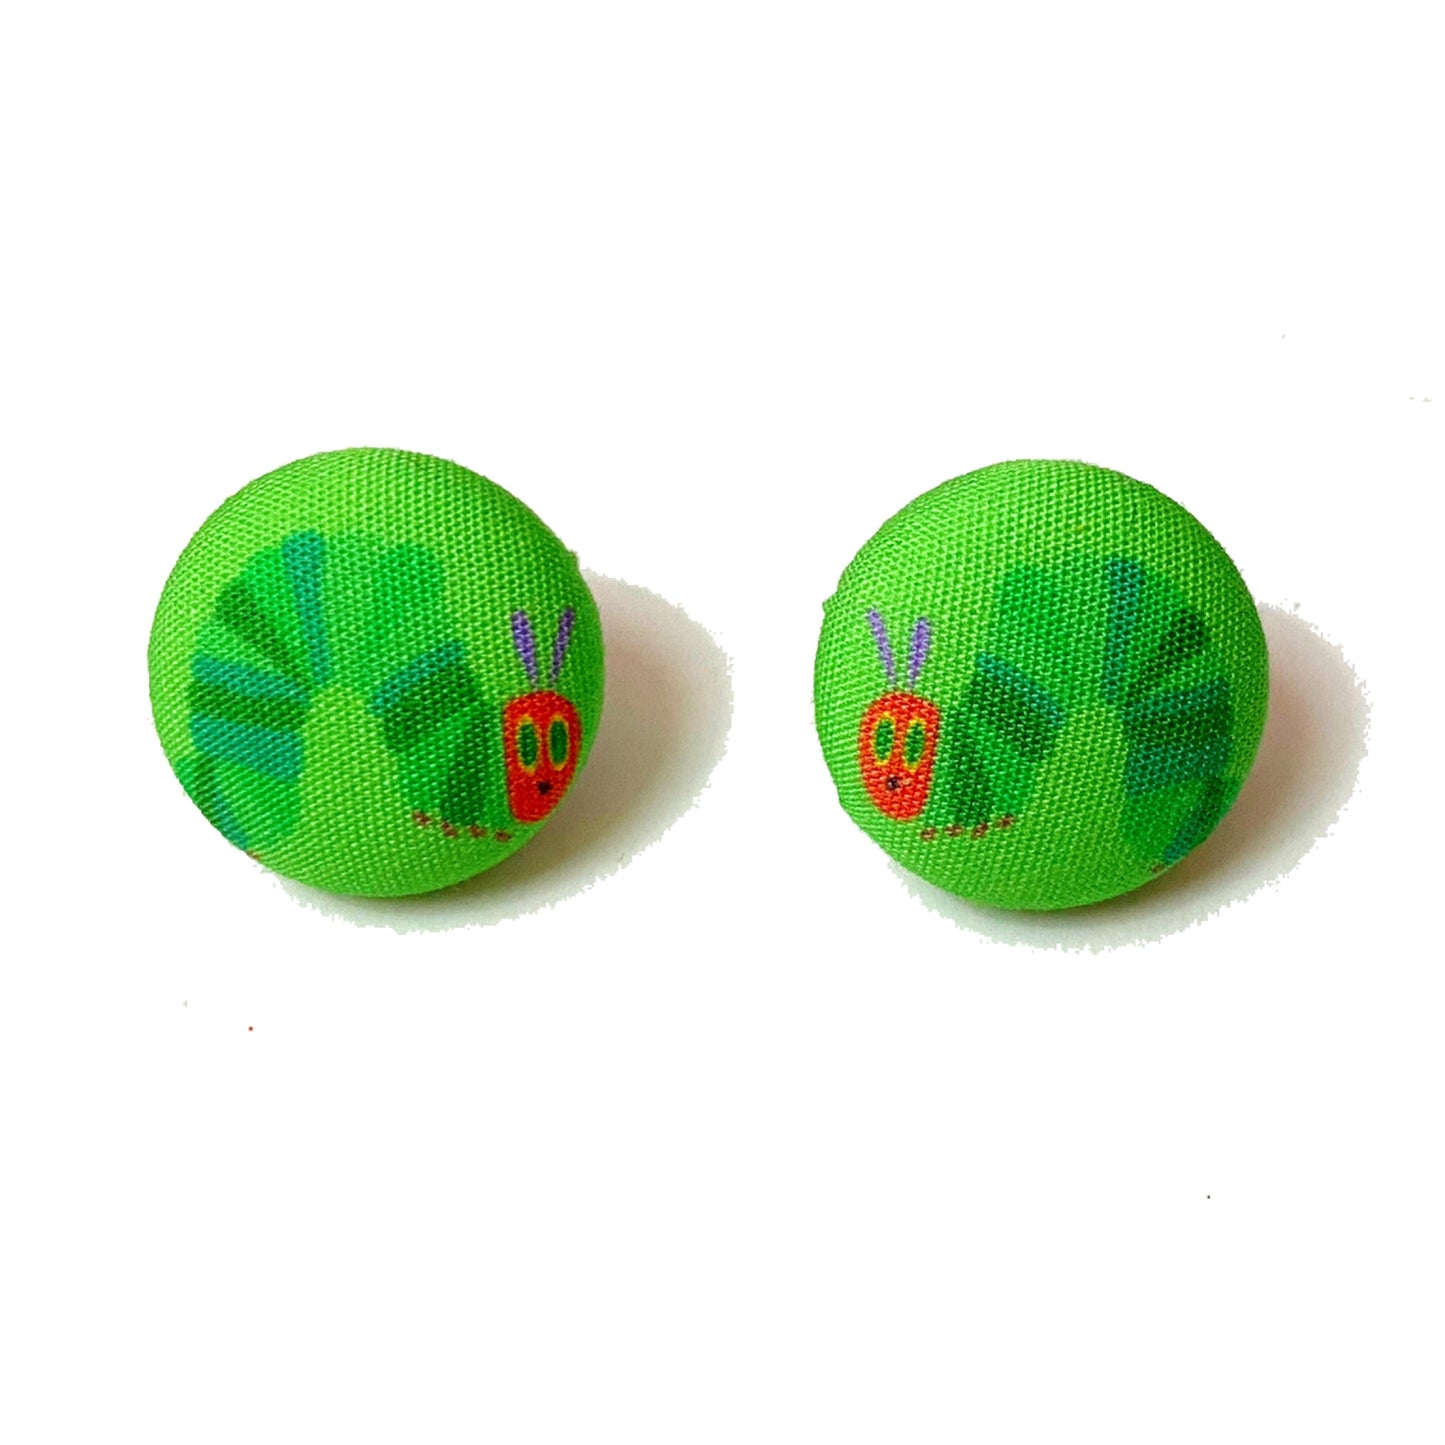 Hungry Caterpillar Inspired Fabric Button Earrings